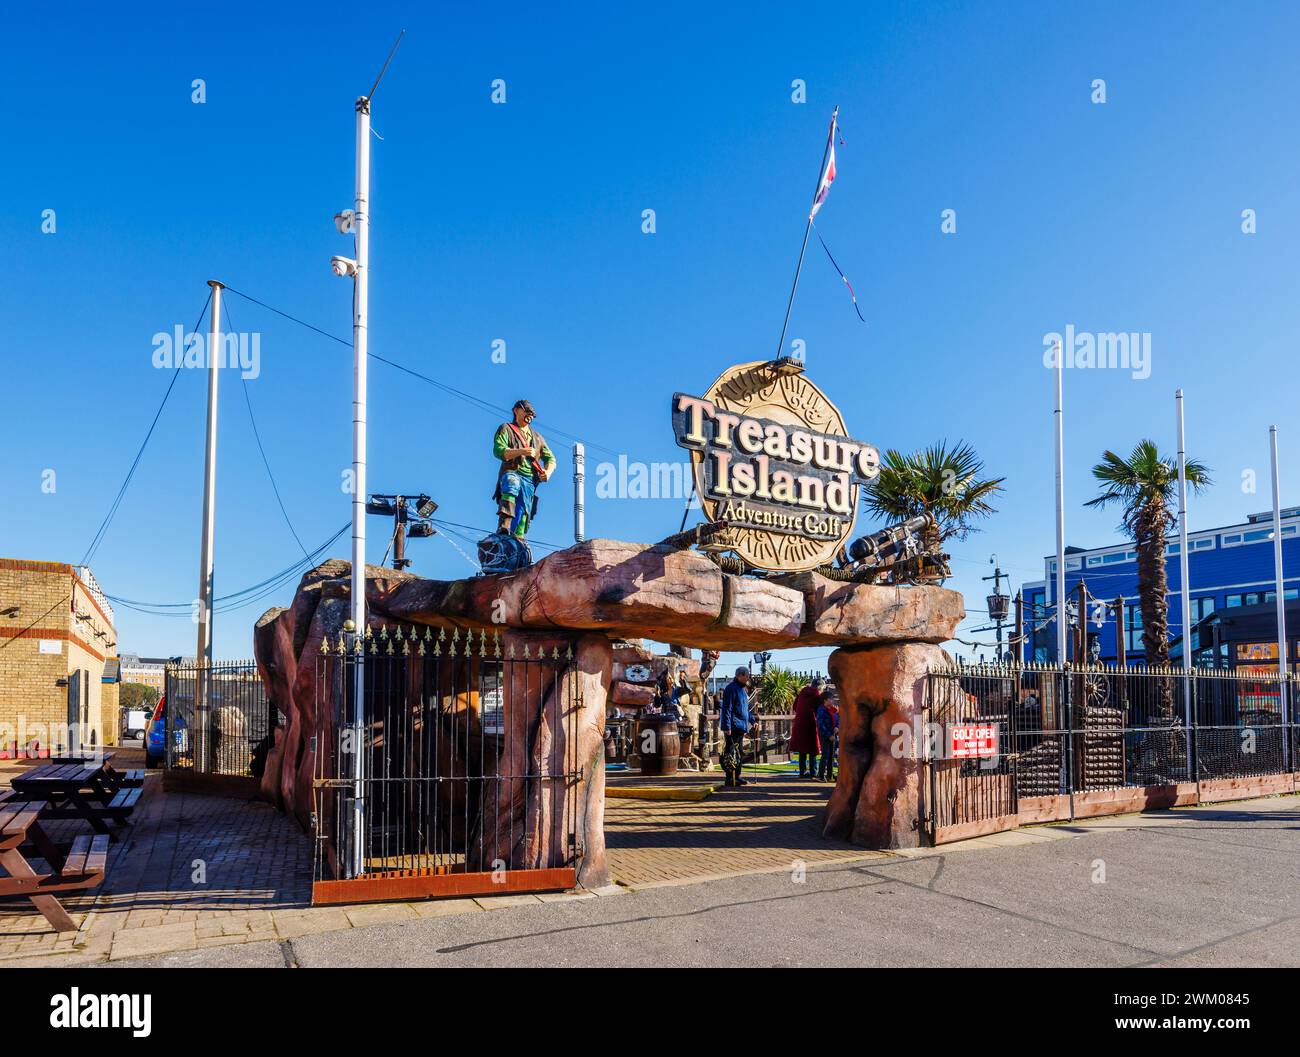 Treasure Island Adventure Golf, pirate themed minigolf in Southsea, Portsmouth, Hampshire, a holiday resort on the Solent in south coast England Stock Photo